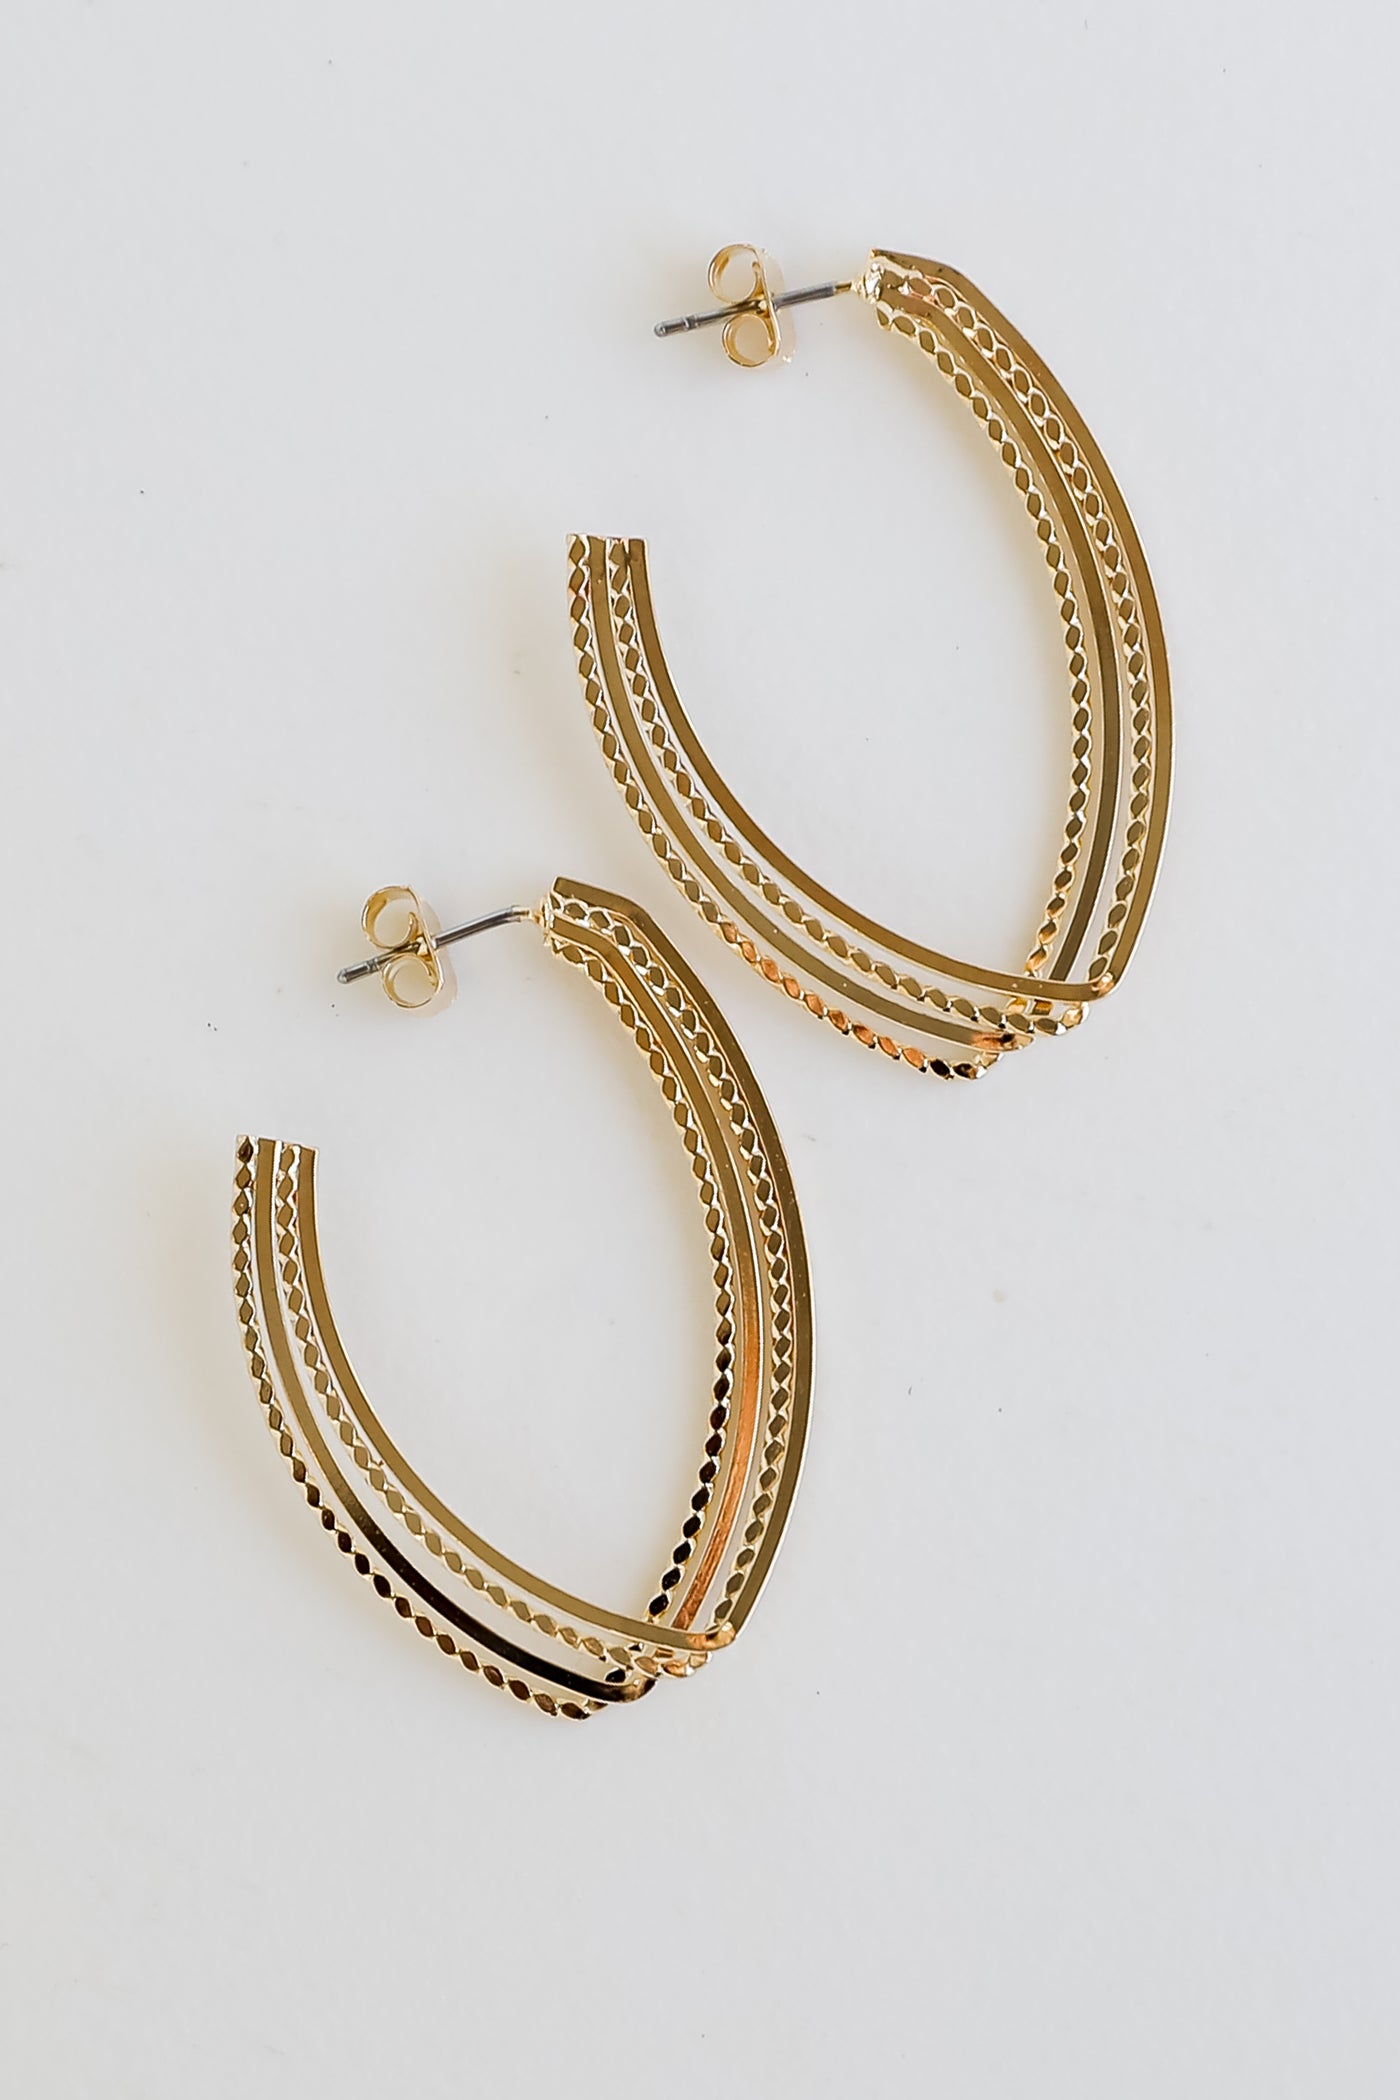 Gold Statement Earrings close up